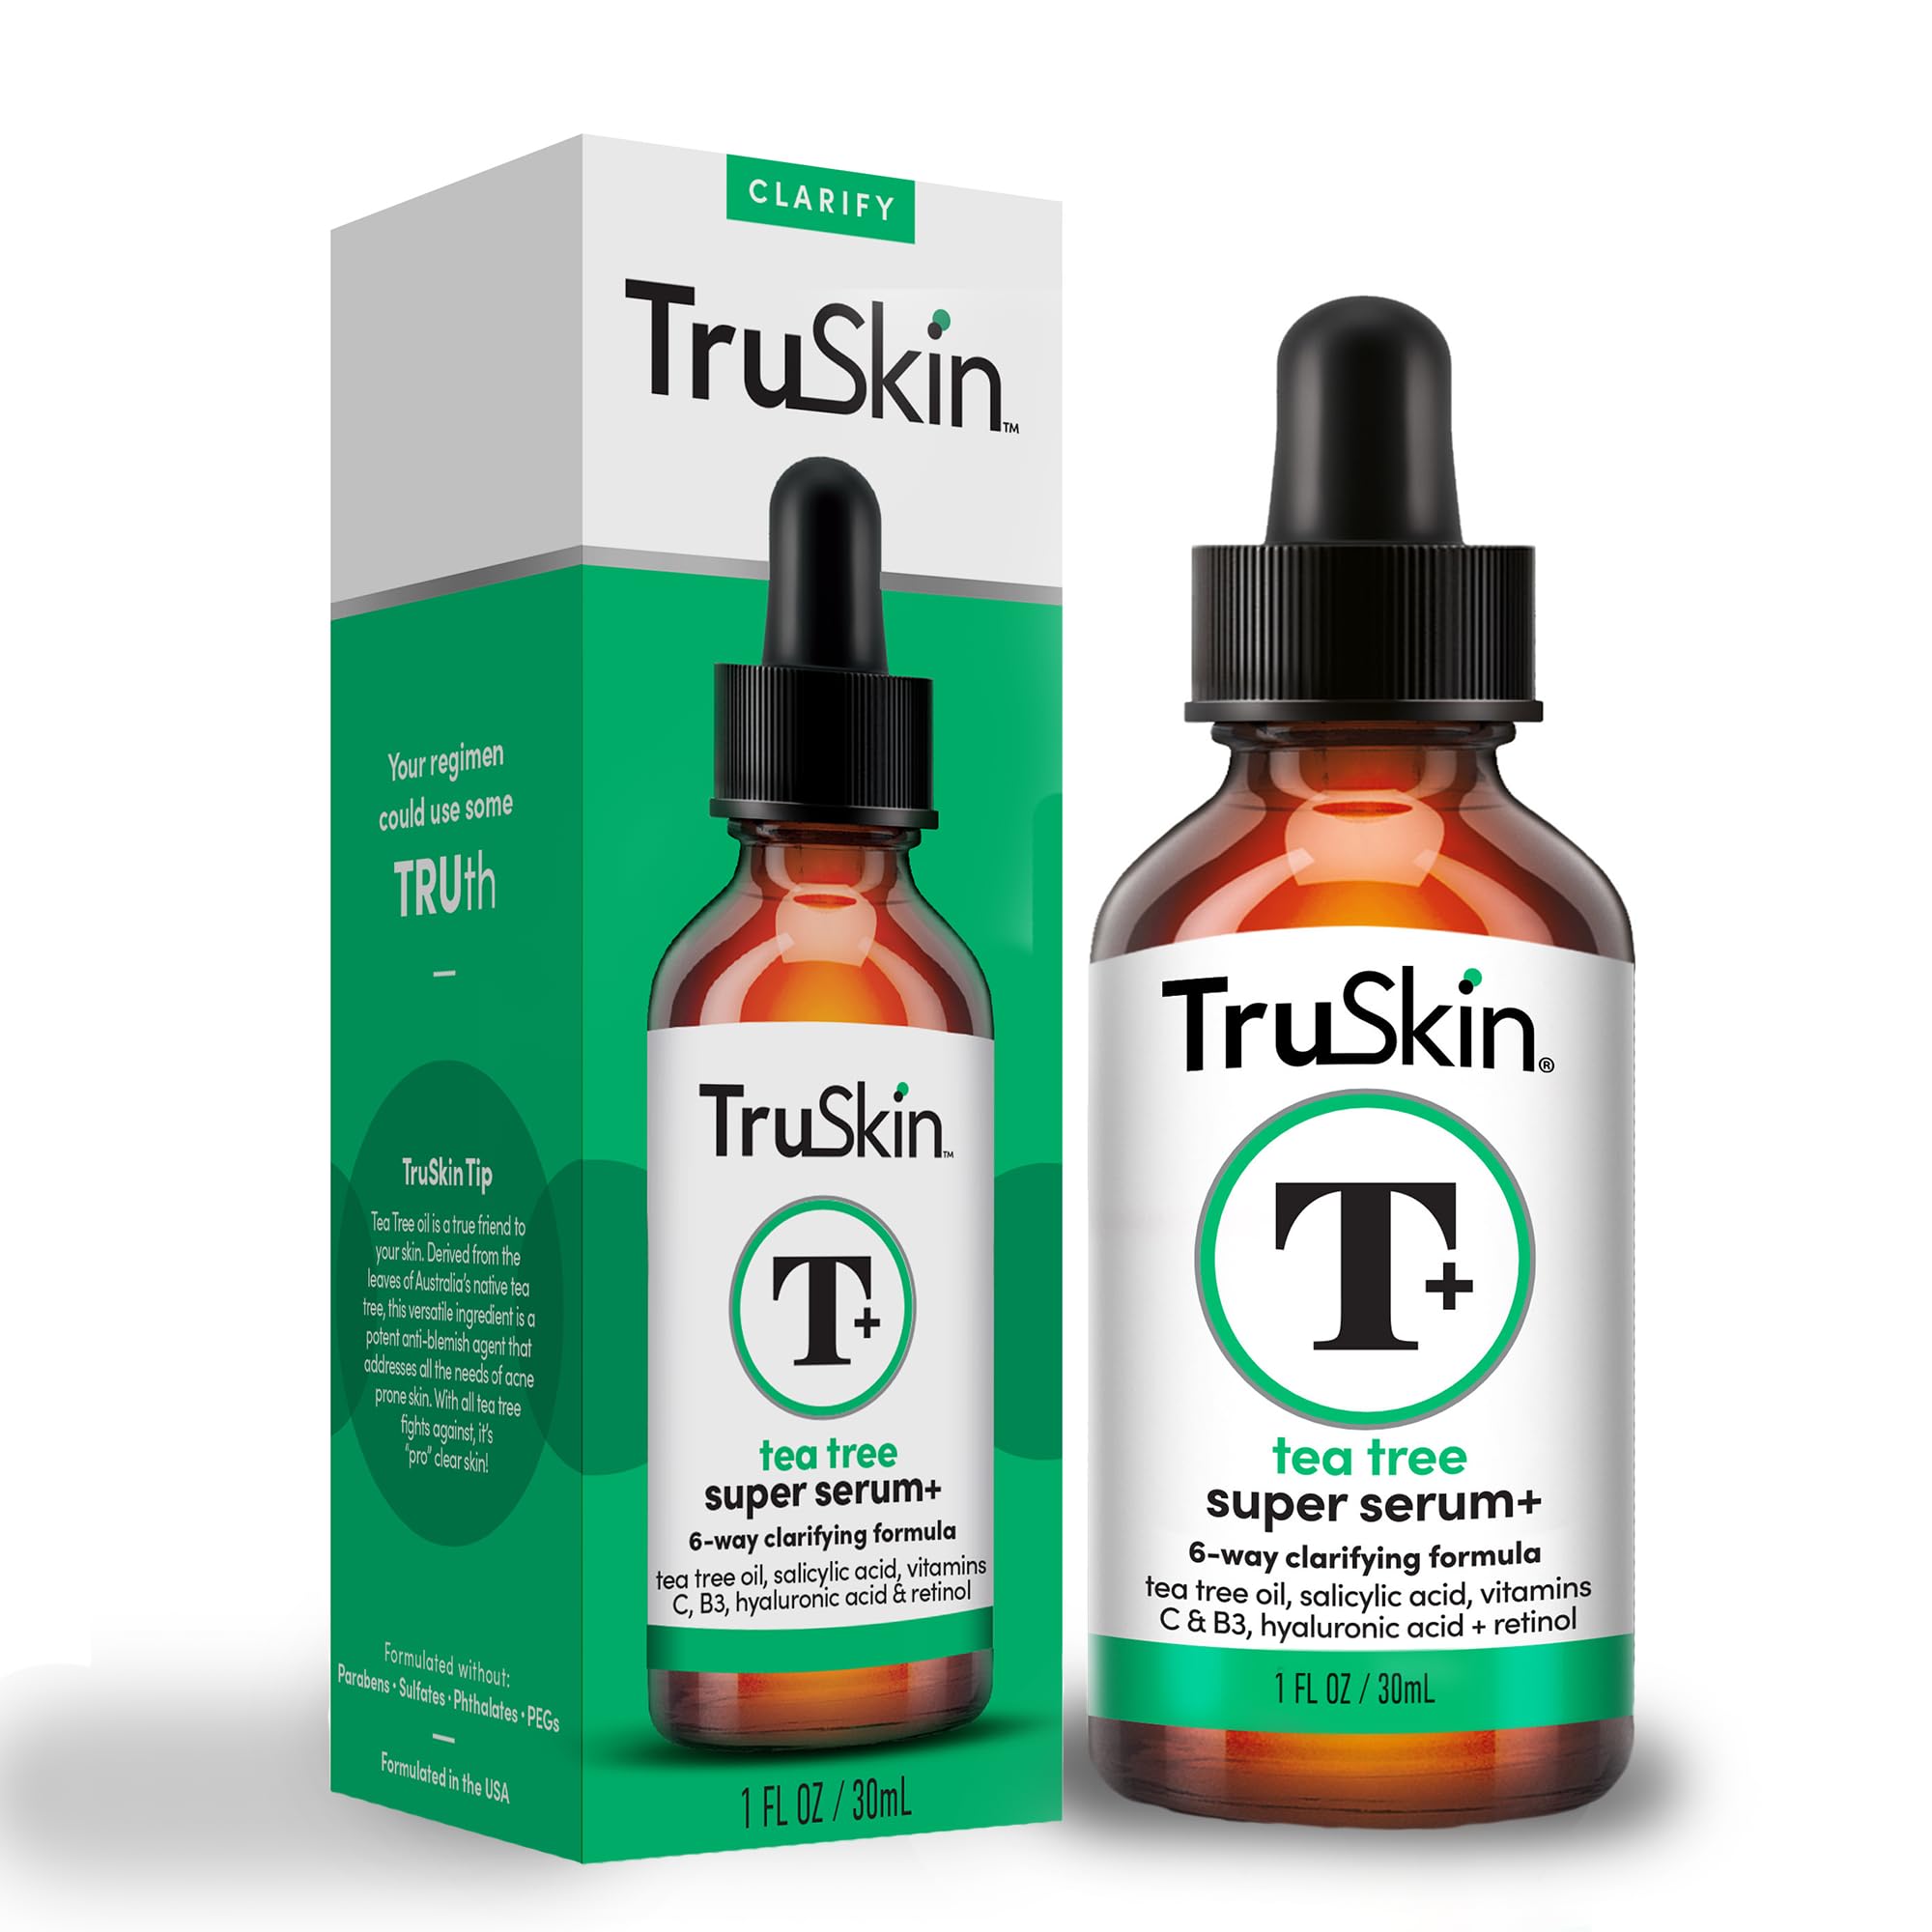 TruSkin Tea Tree Super Serum for Face – Clarifying Facial Serum with Tea Tree Oil, Salicylic Acid, Hyaluronic Acid and Niacinamide – Skin Care Made to Unclog Pores & Soothe Unhappy Skin, 1 fl oz